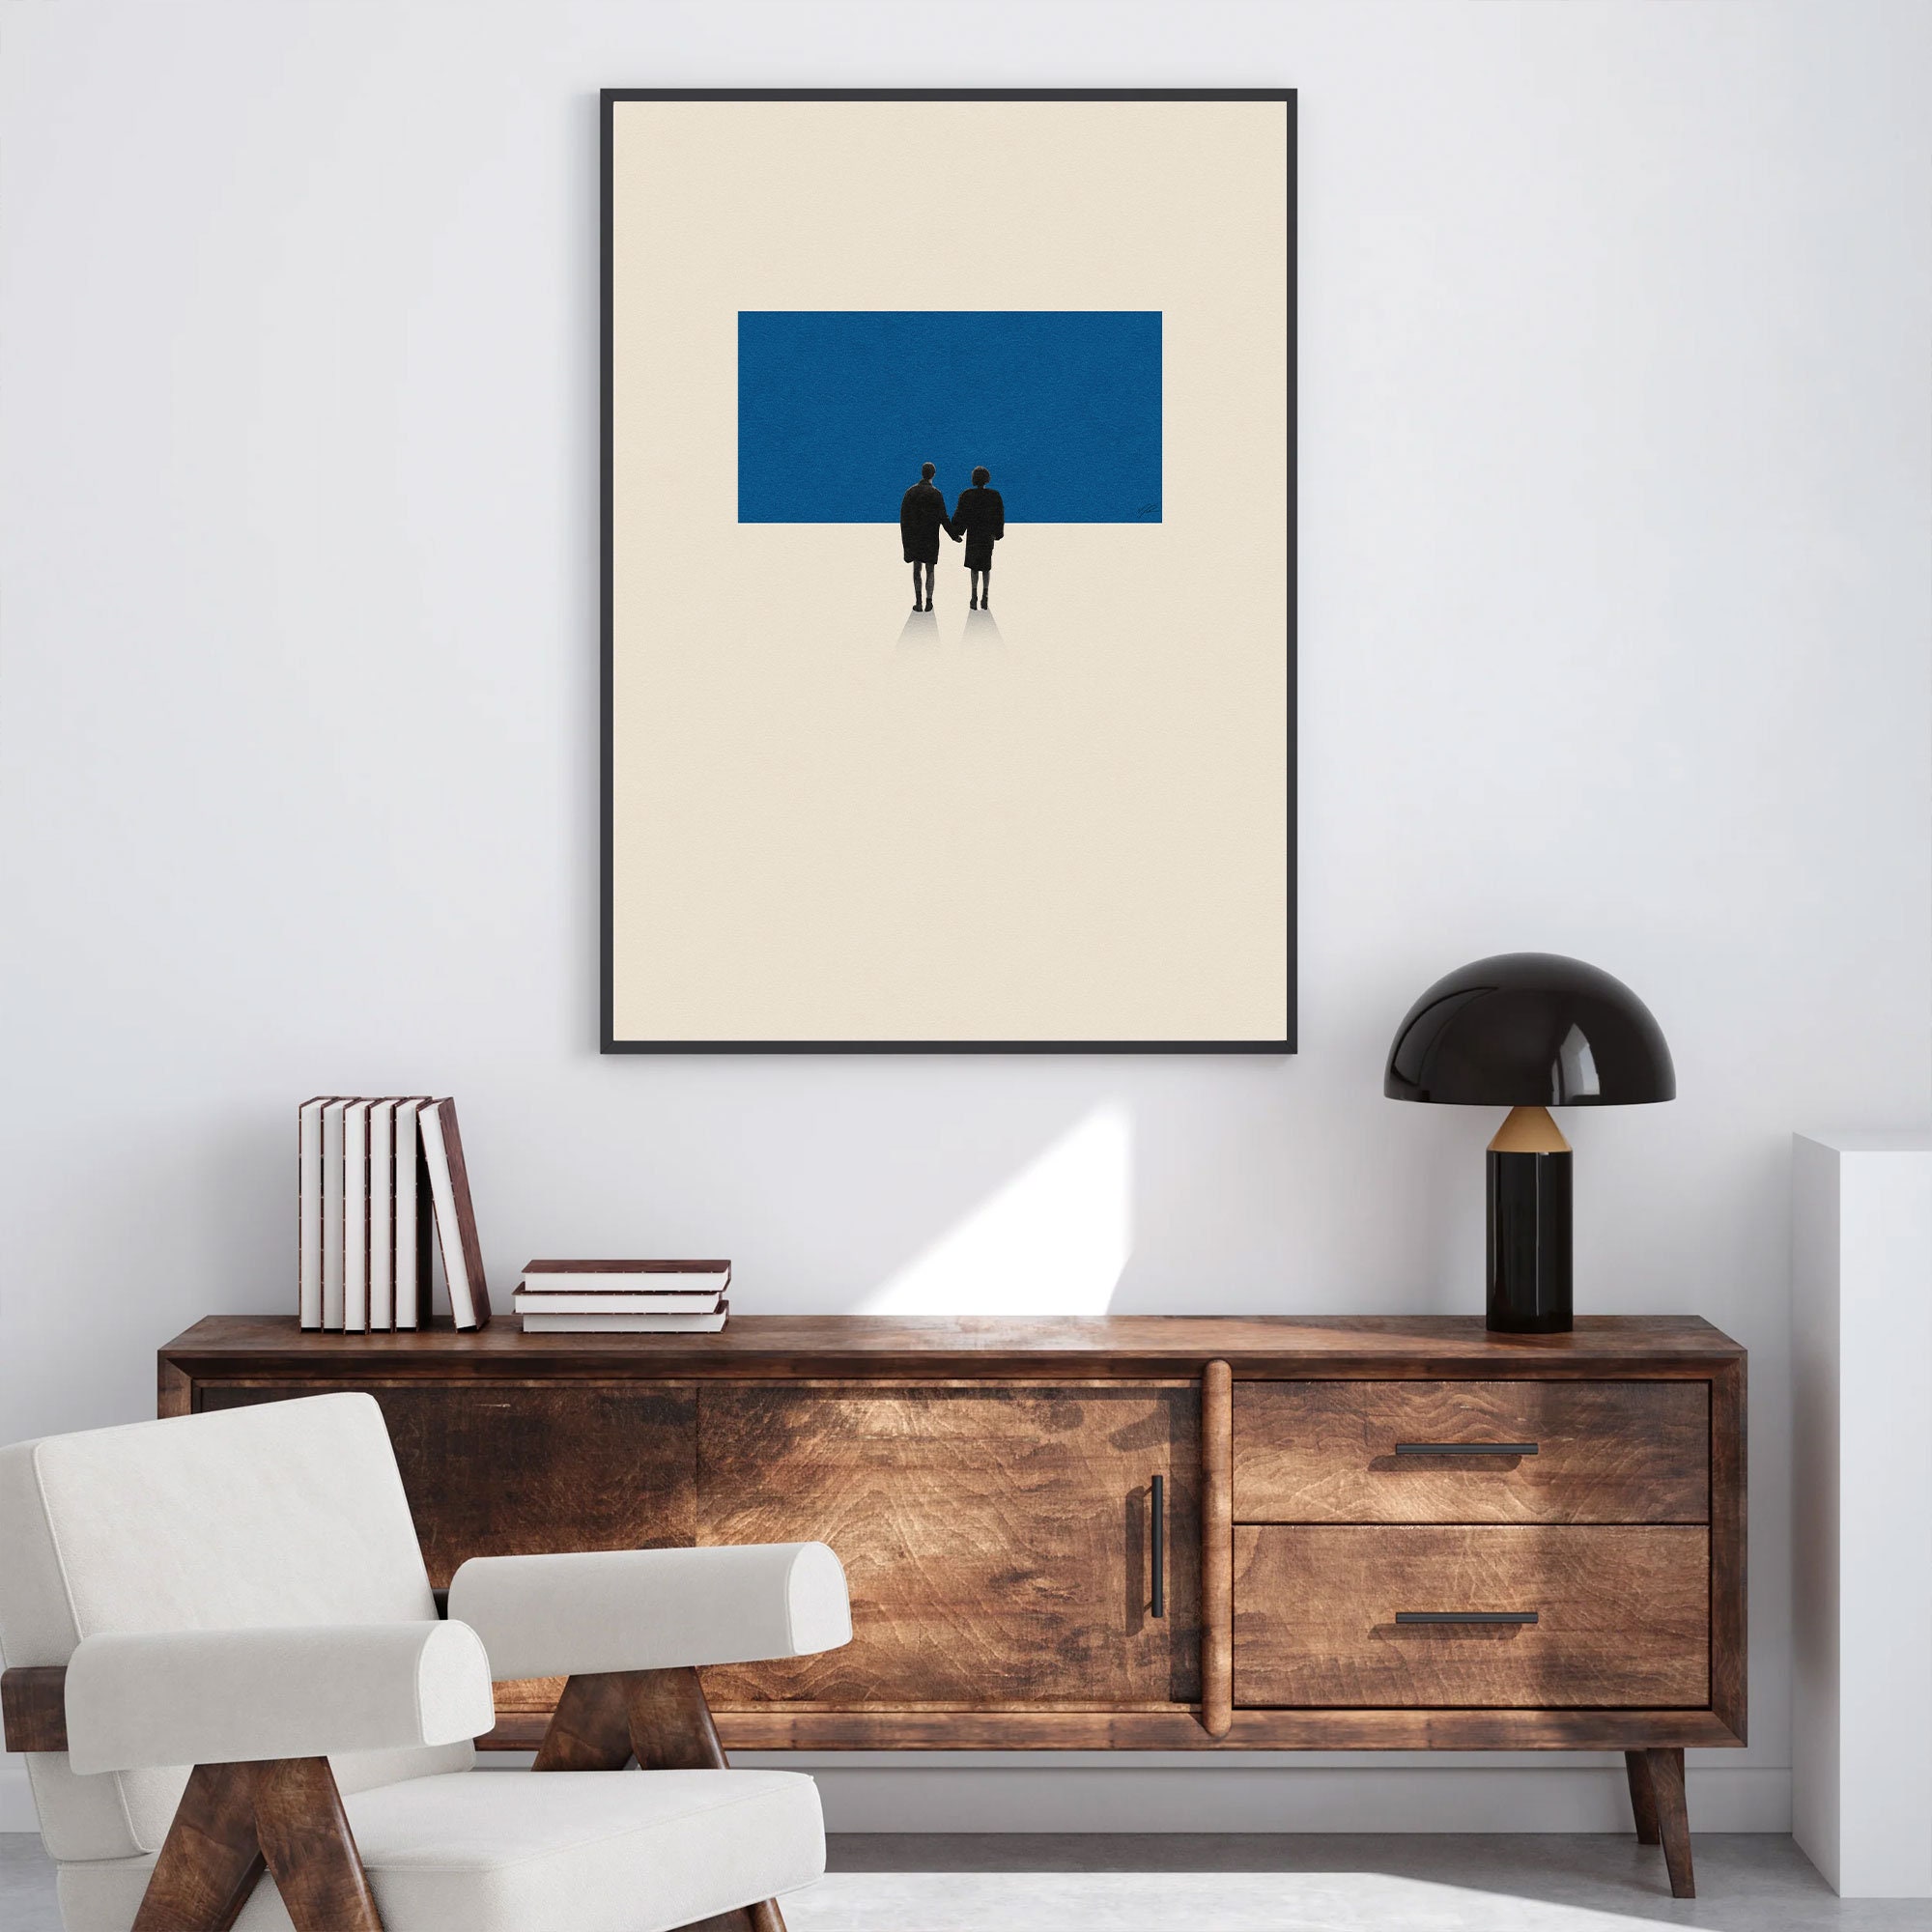 Discover Fight Club Inspired Poster | Mid Century Modern Poster | Minimalist Poster, No Frame